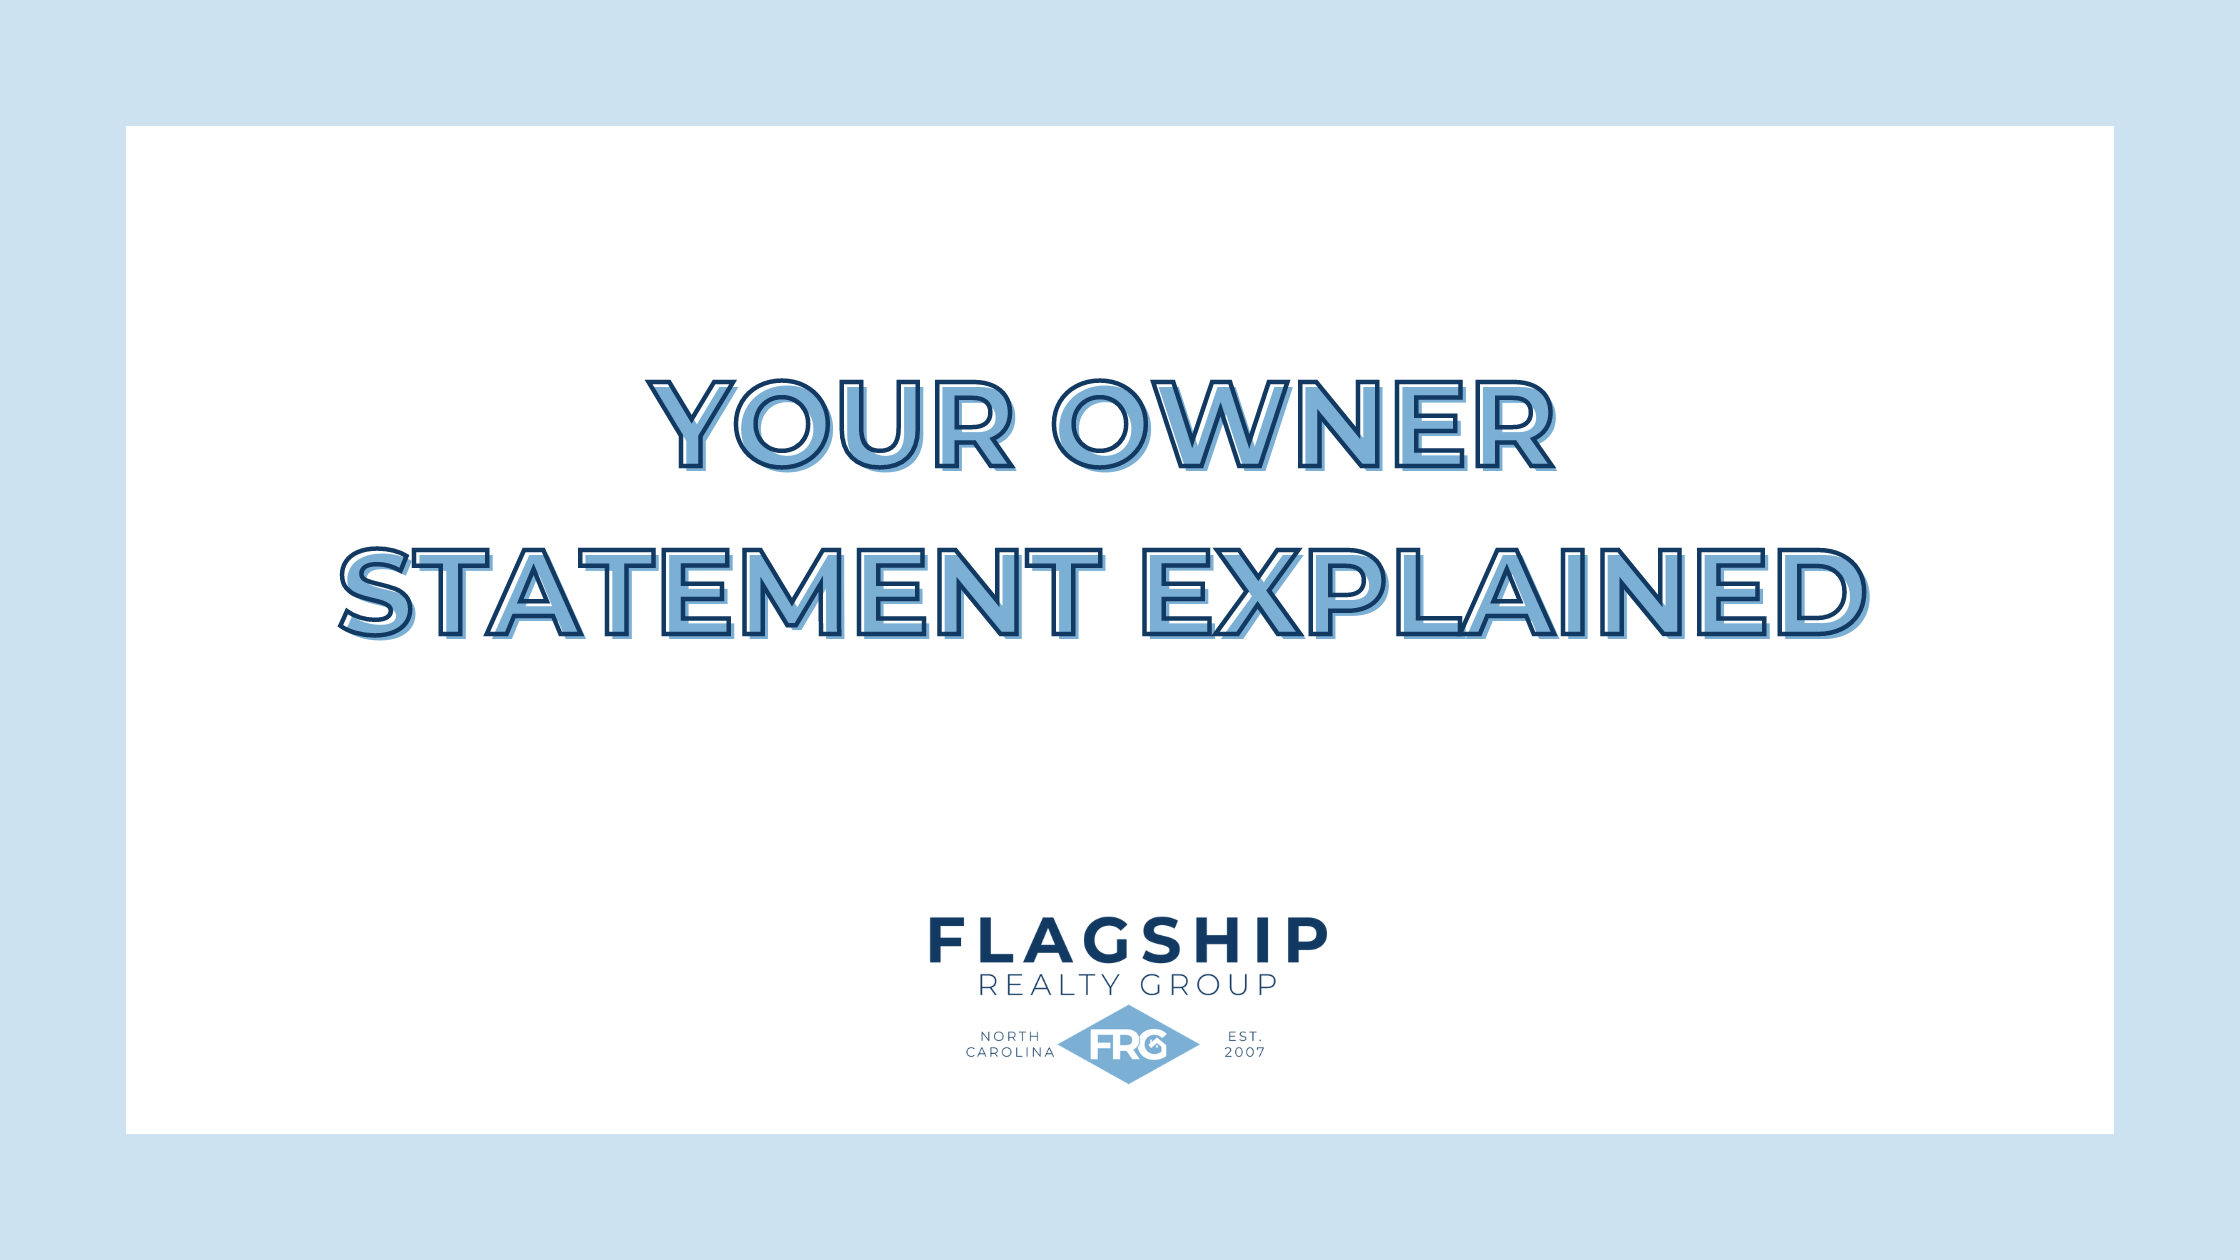 Your Owner Statement Explained